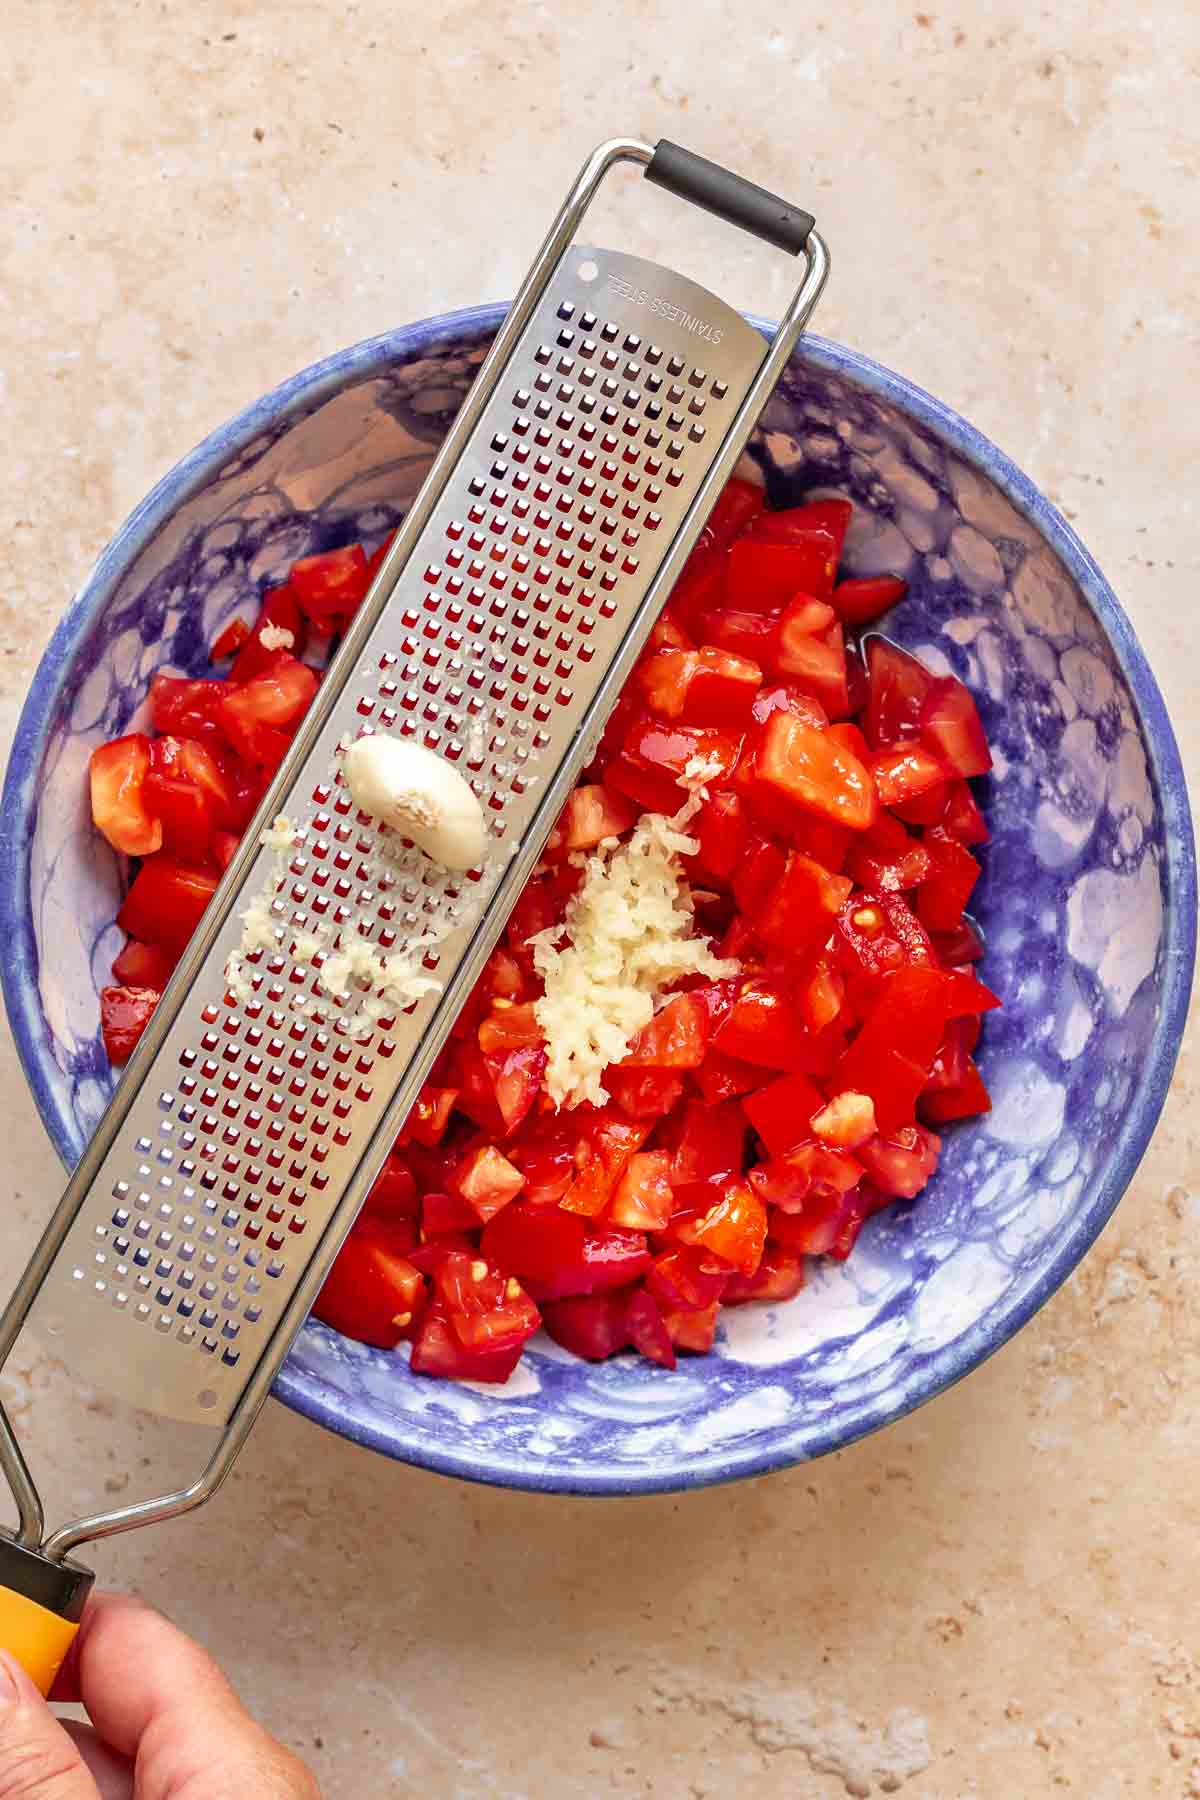 A garlic clove being grated into tomatoes.